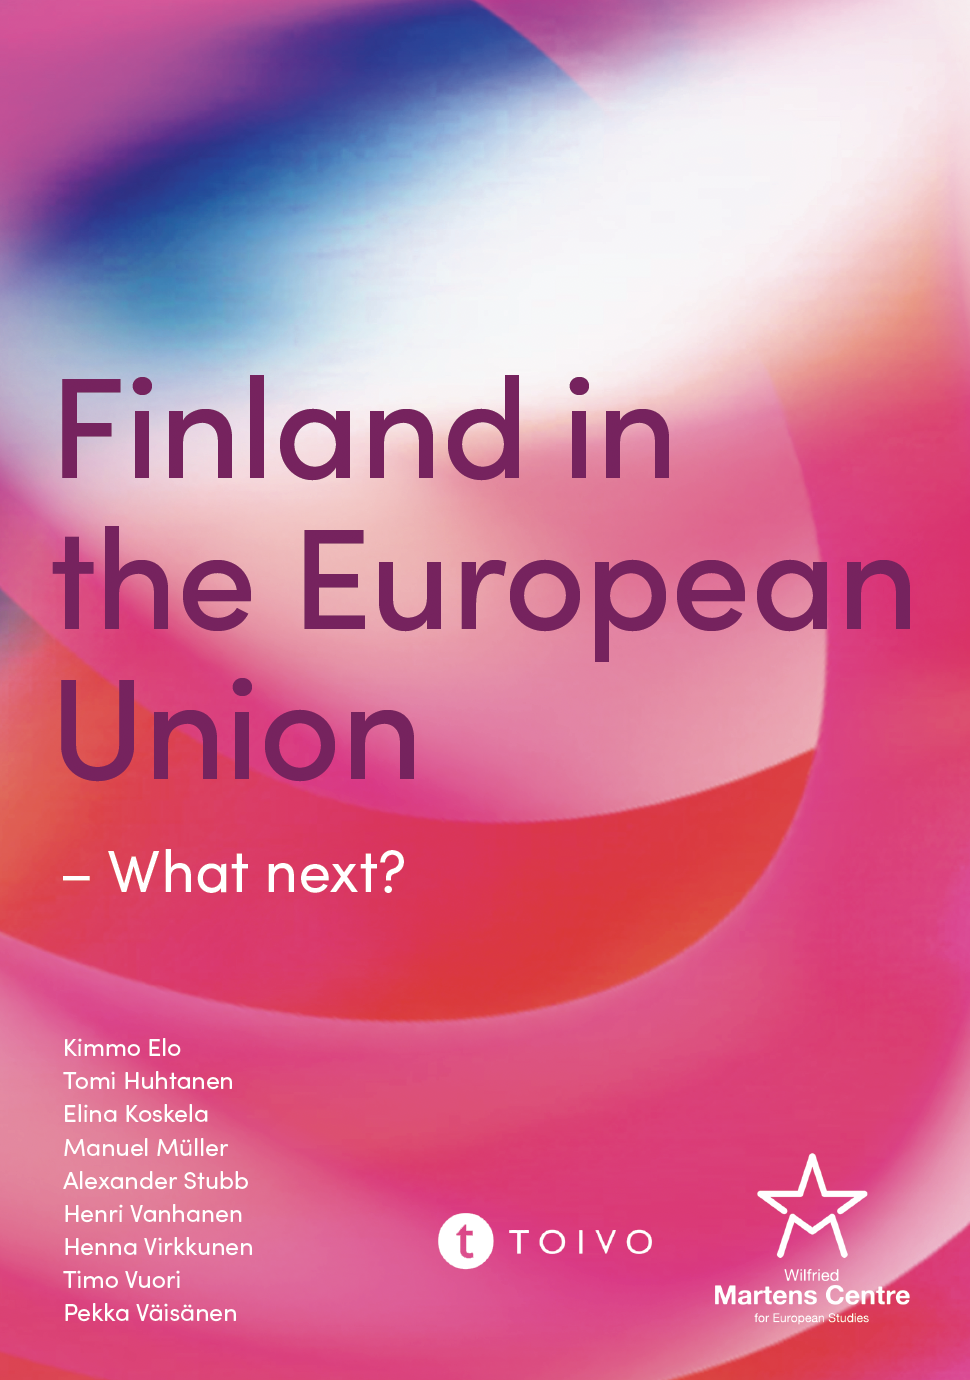 Finland in the European Union– What next?